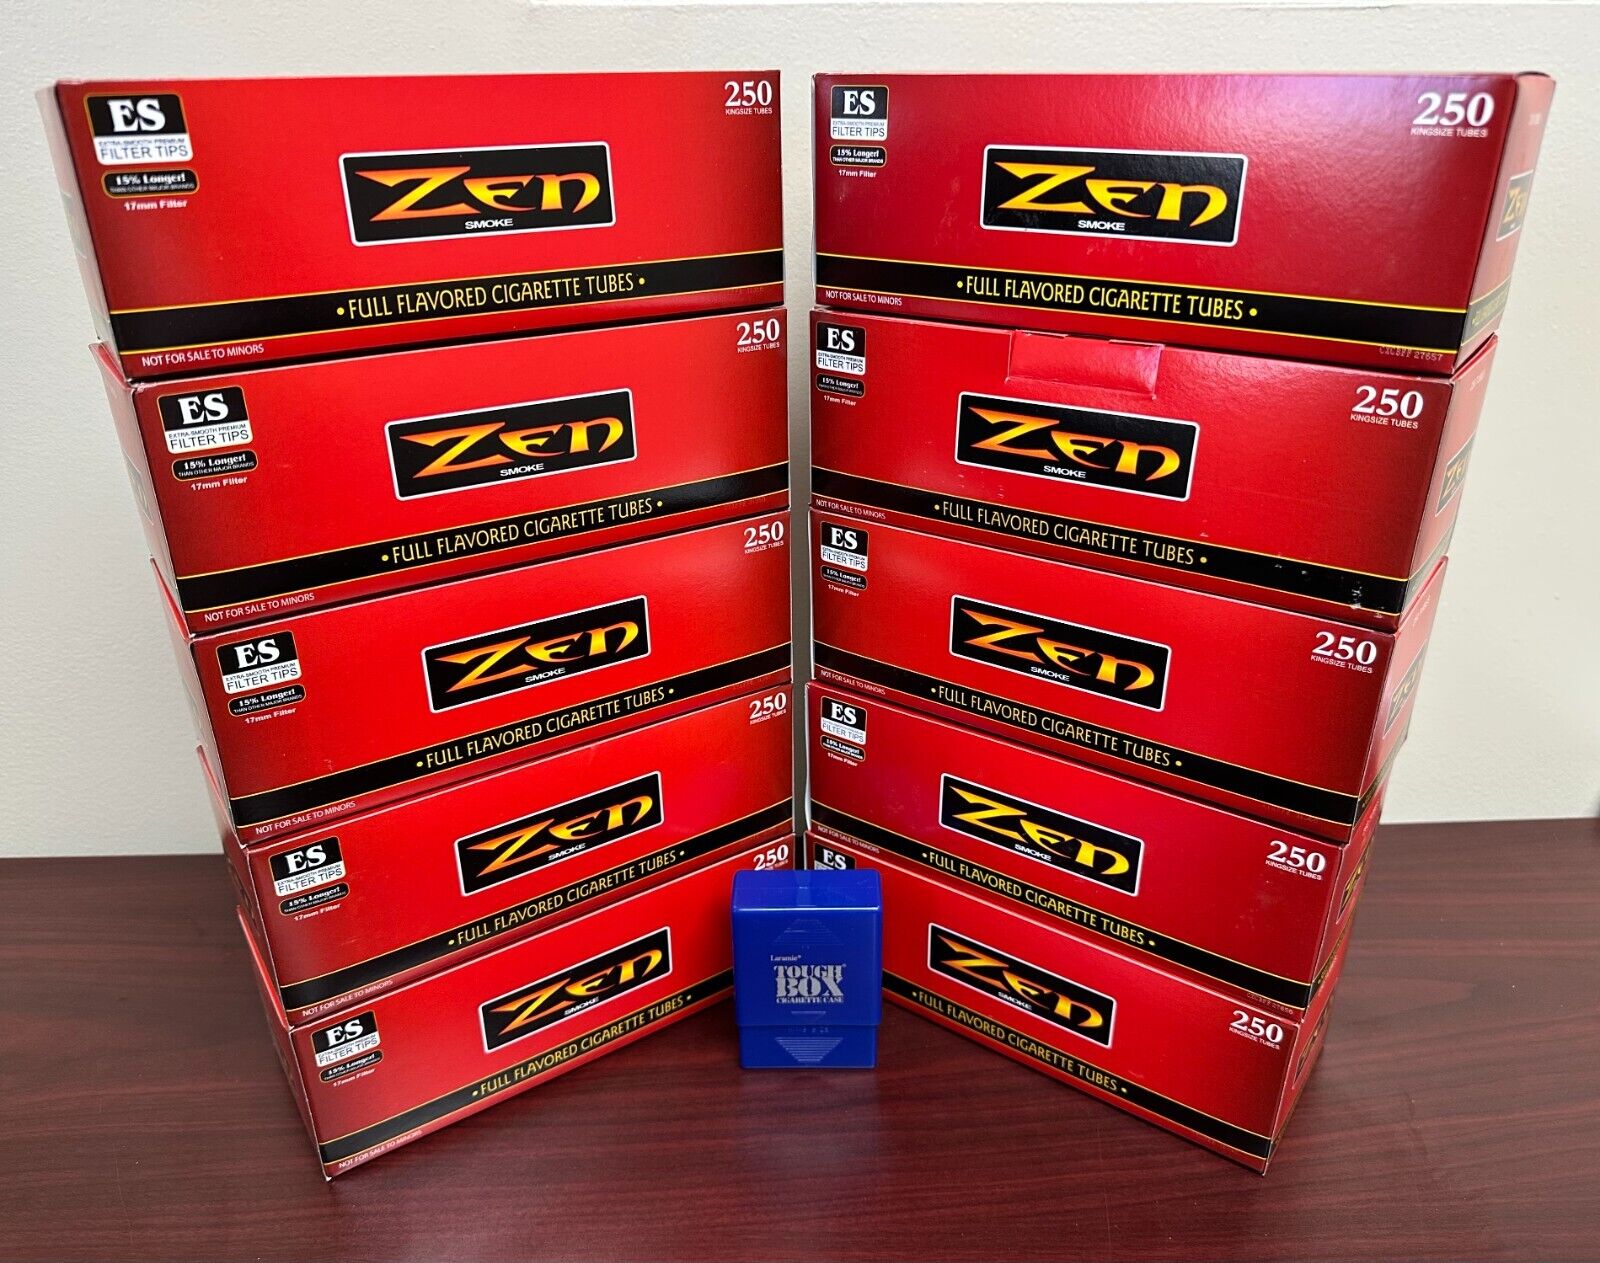 Zen Red King Size Full Regular Cigarette Tubes 10 Boxes Comes With BLUE Case